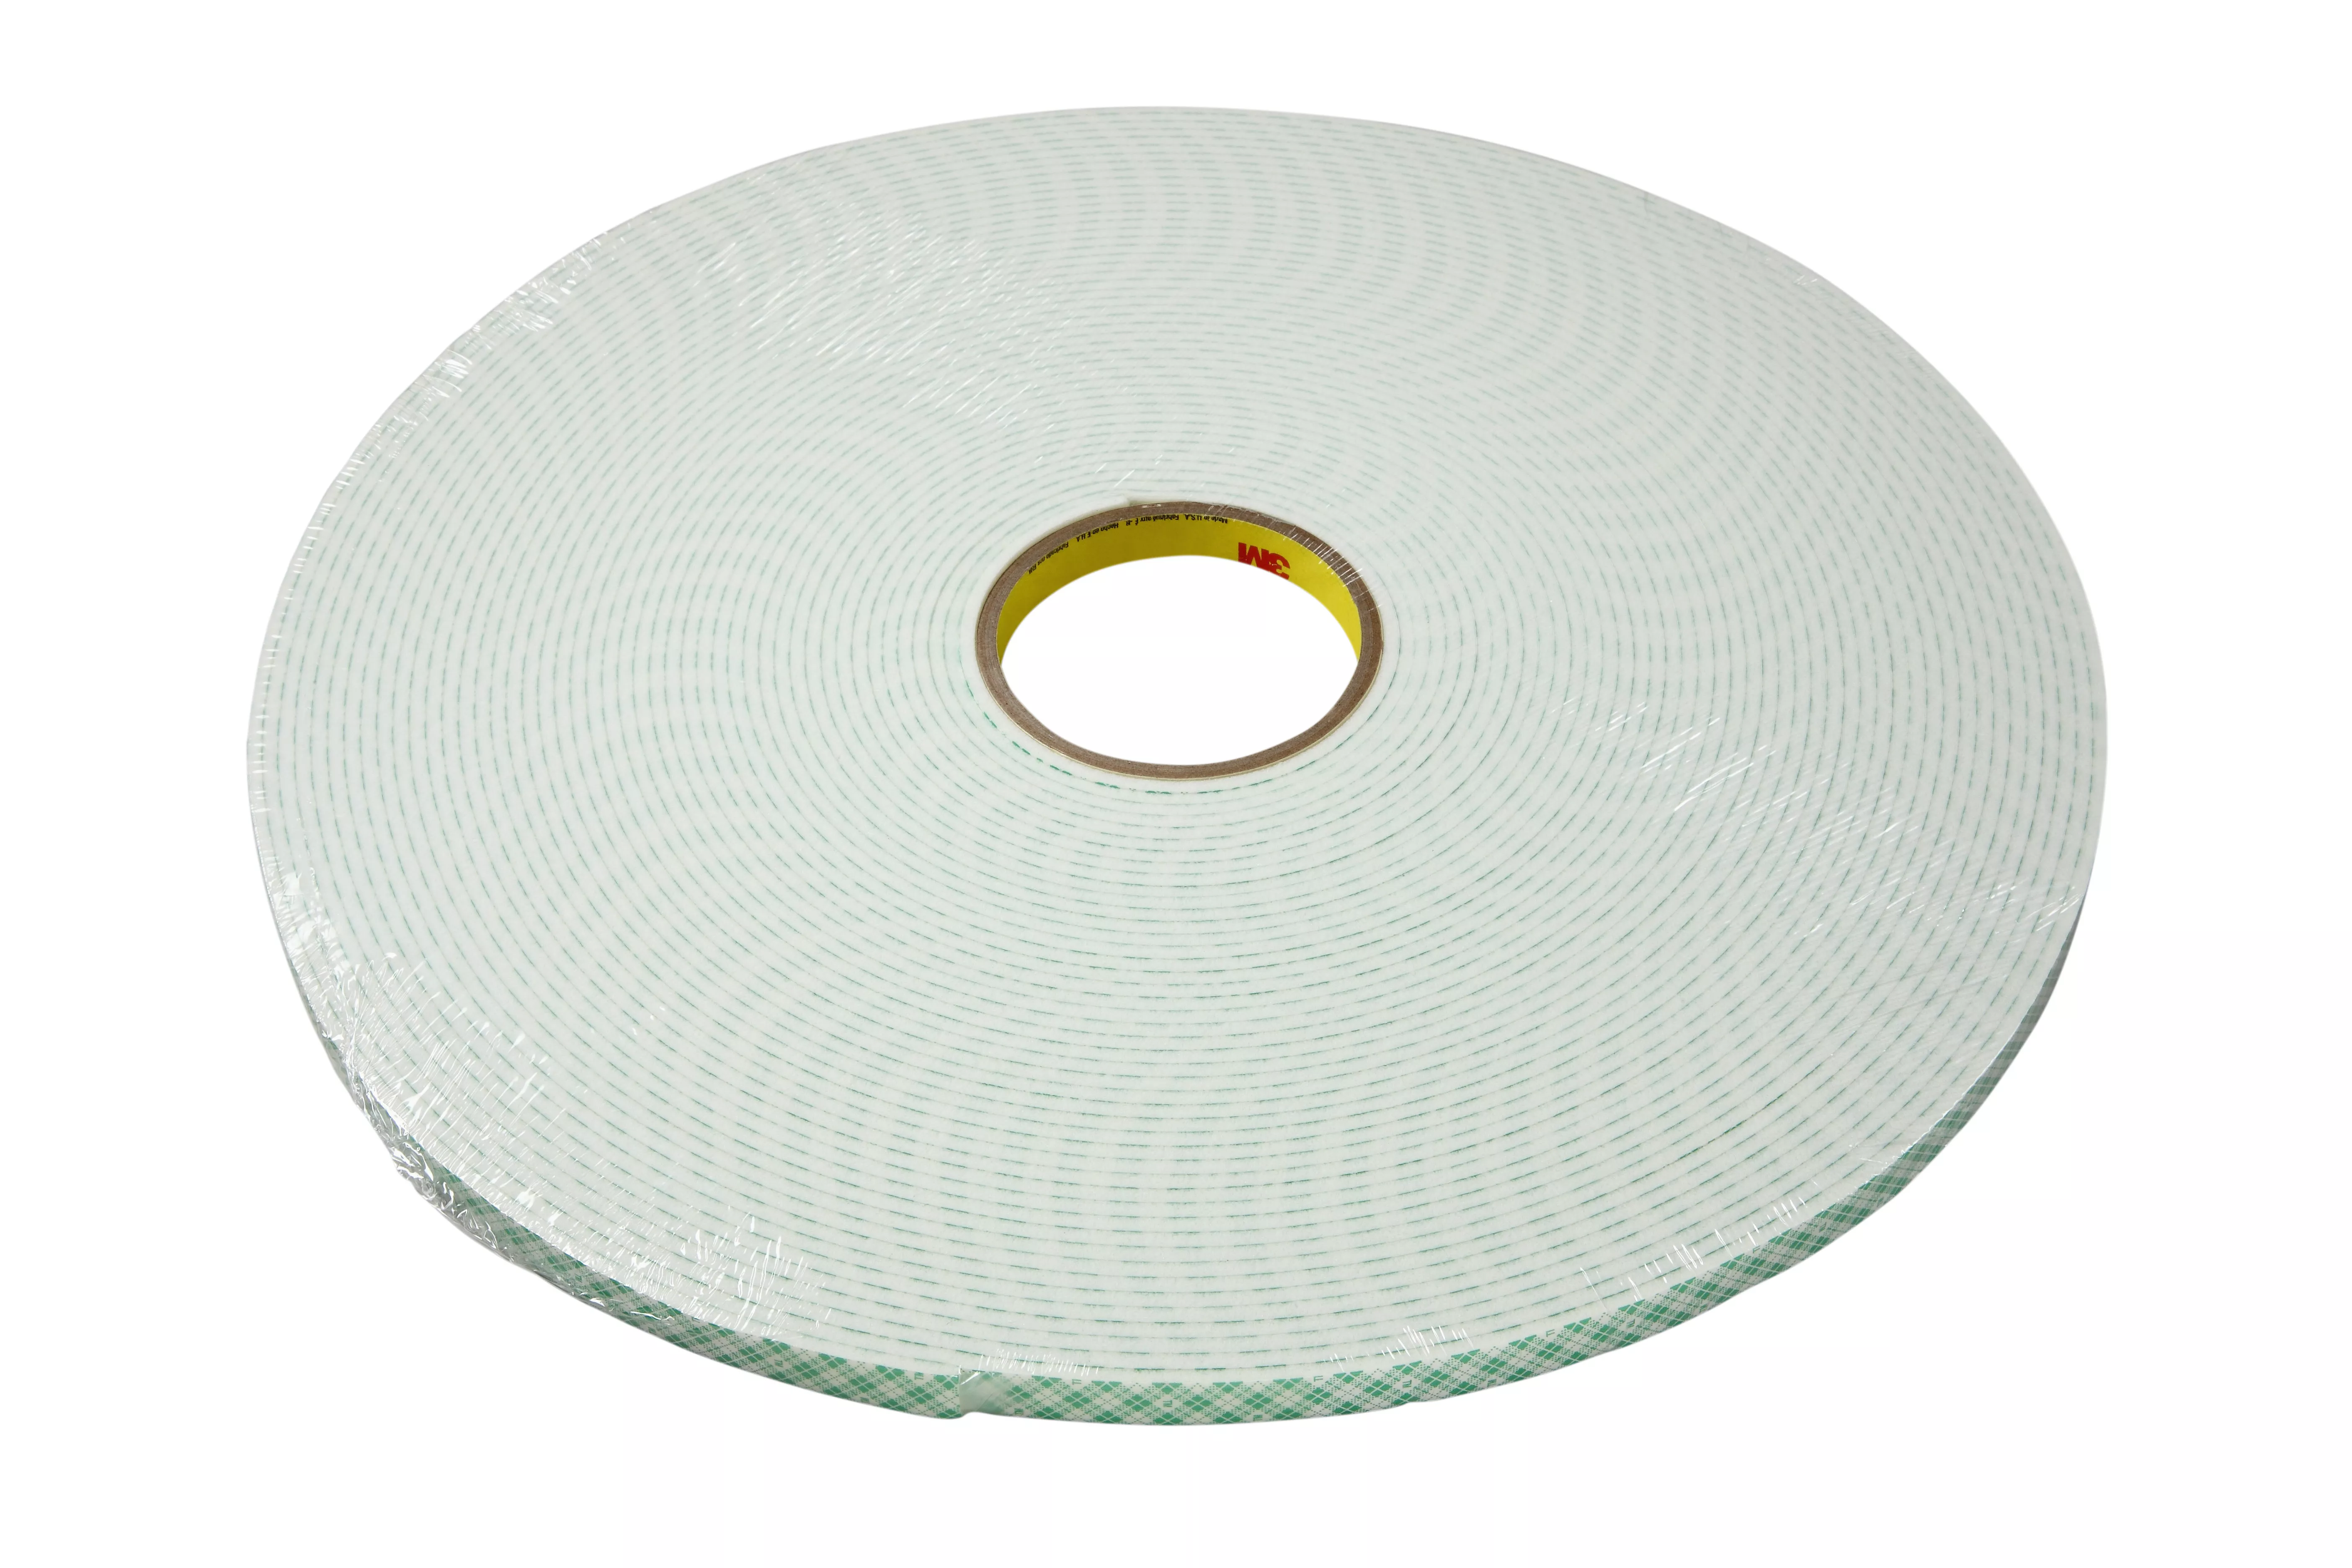 3M™ Double Coated Urethane Foam Tape 4008, Off White, 3/8 in x 36 yd,
125 mil, 24 Roll/Case